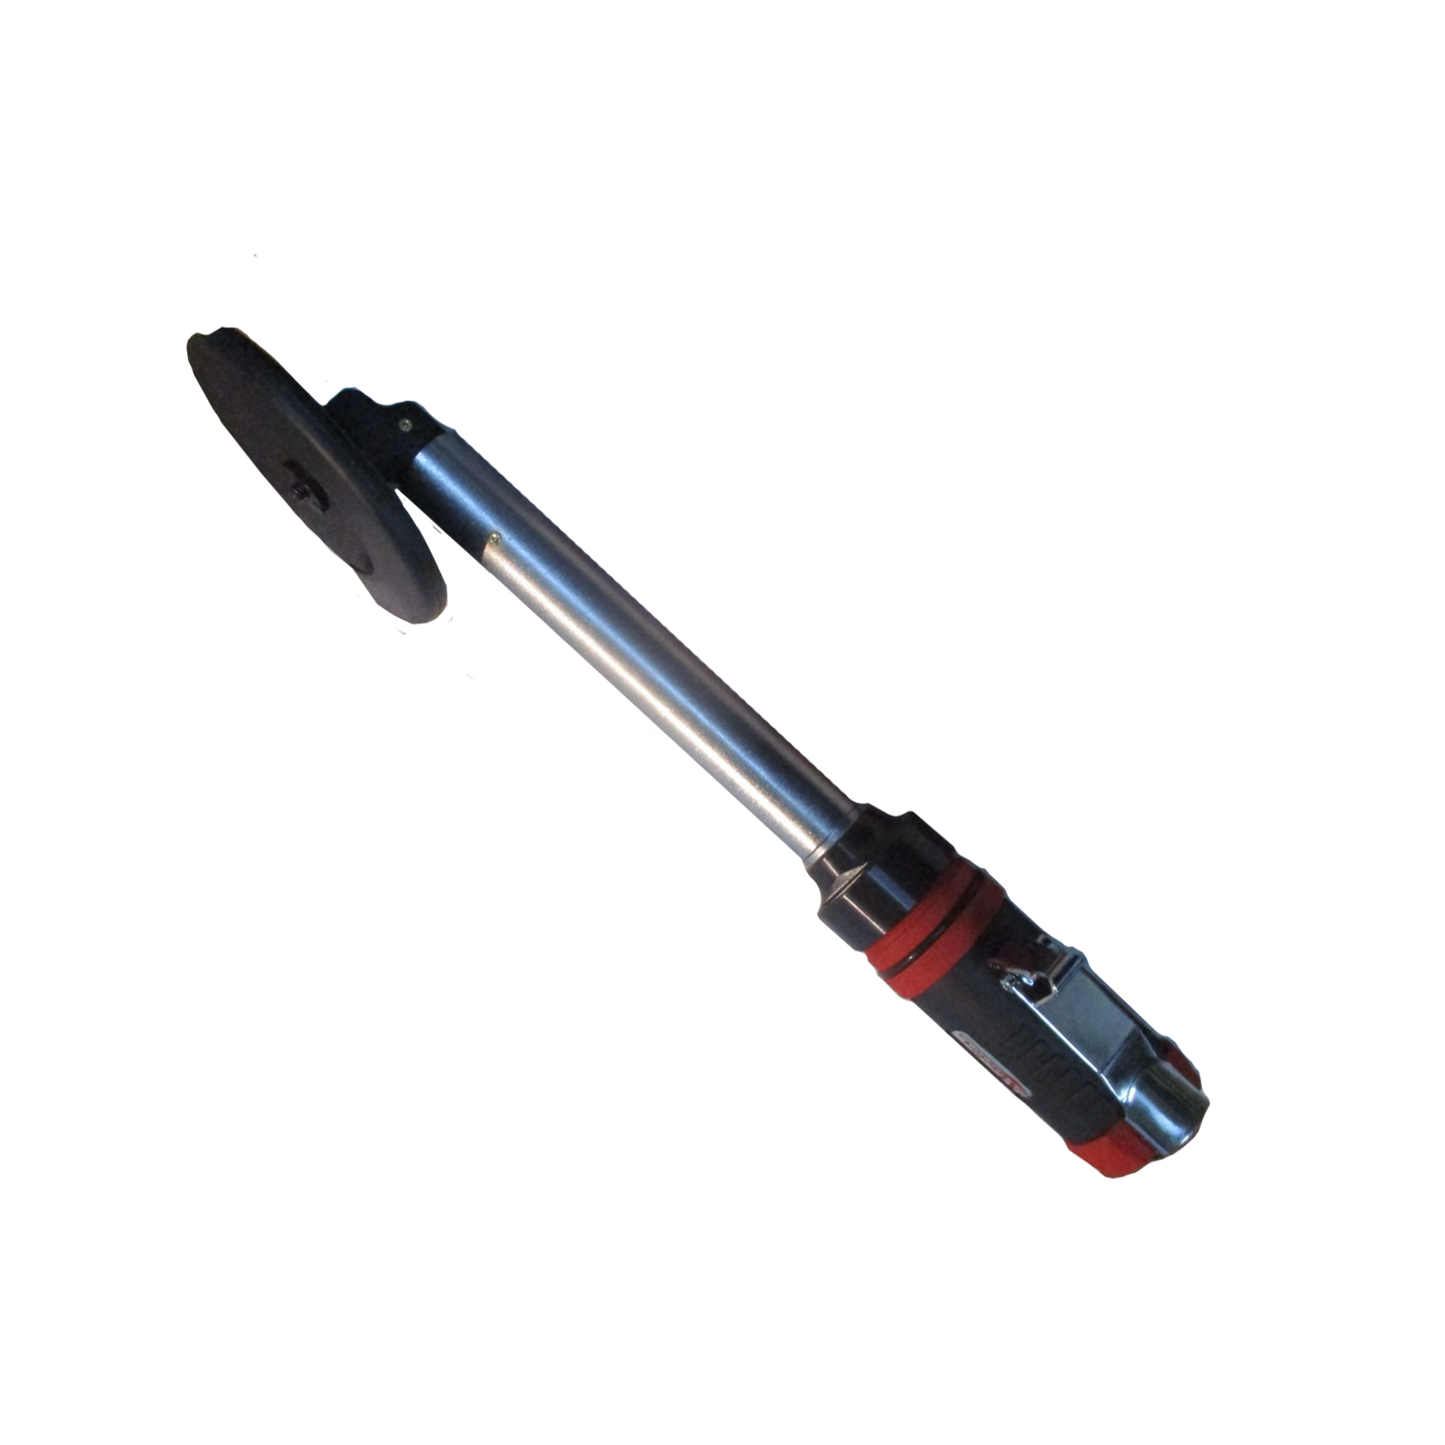 Master Palm 7 Inch Long Neck Extended Shaft 4 Inch Angle Cut off Tool - 19000 Rpm